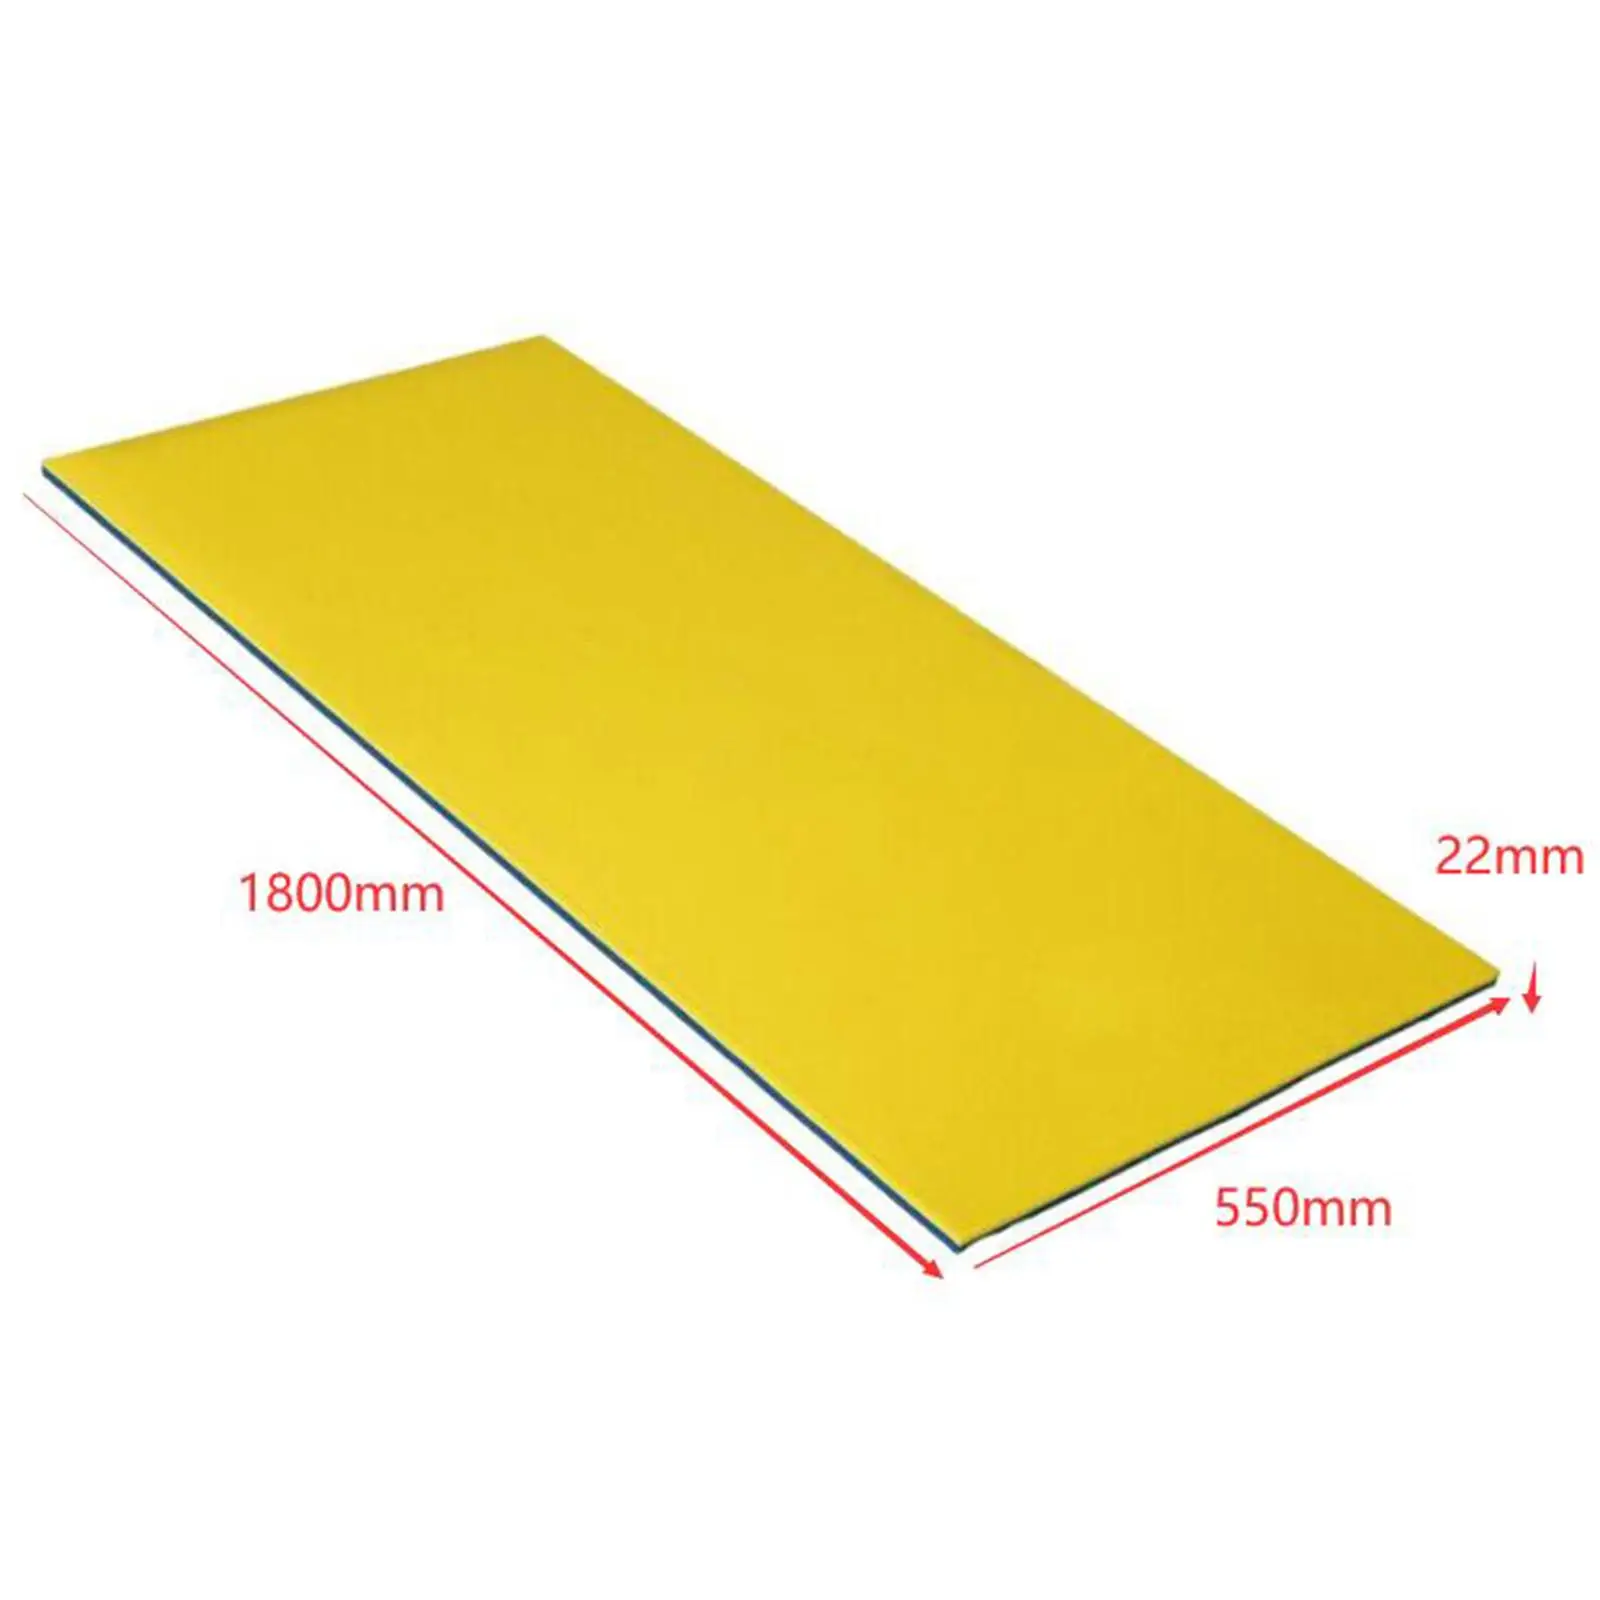 Water Floating Mat Float Mat Bed Unsinkable Water Blanket Summer Portable Drifting Mattress Floating Pad for Lake River Beach